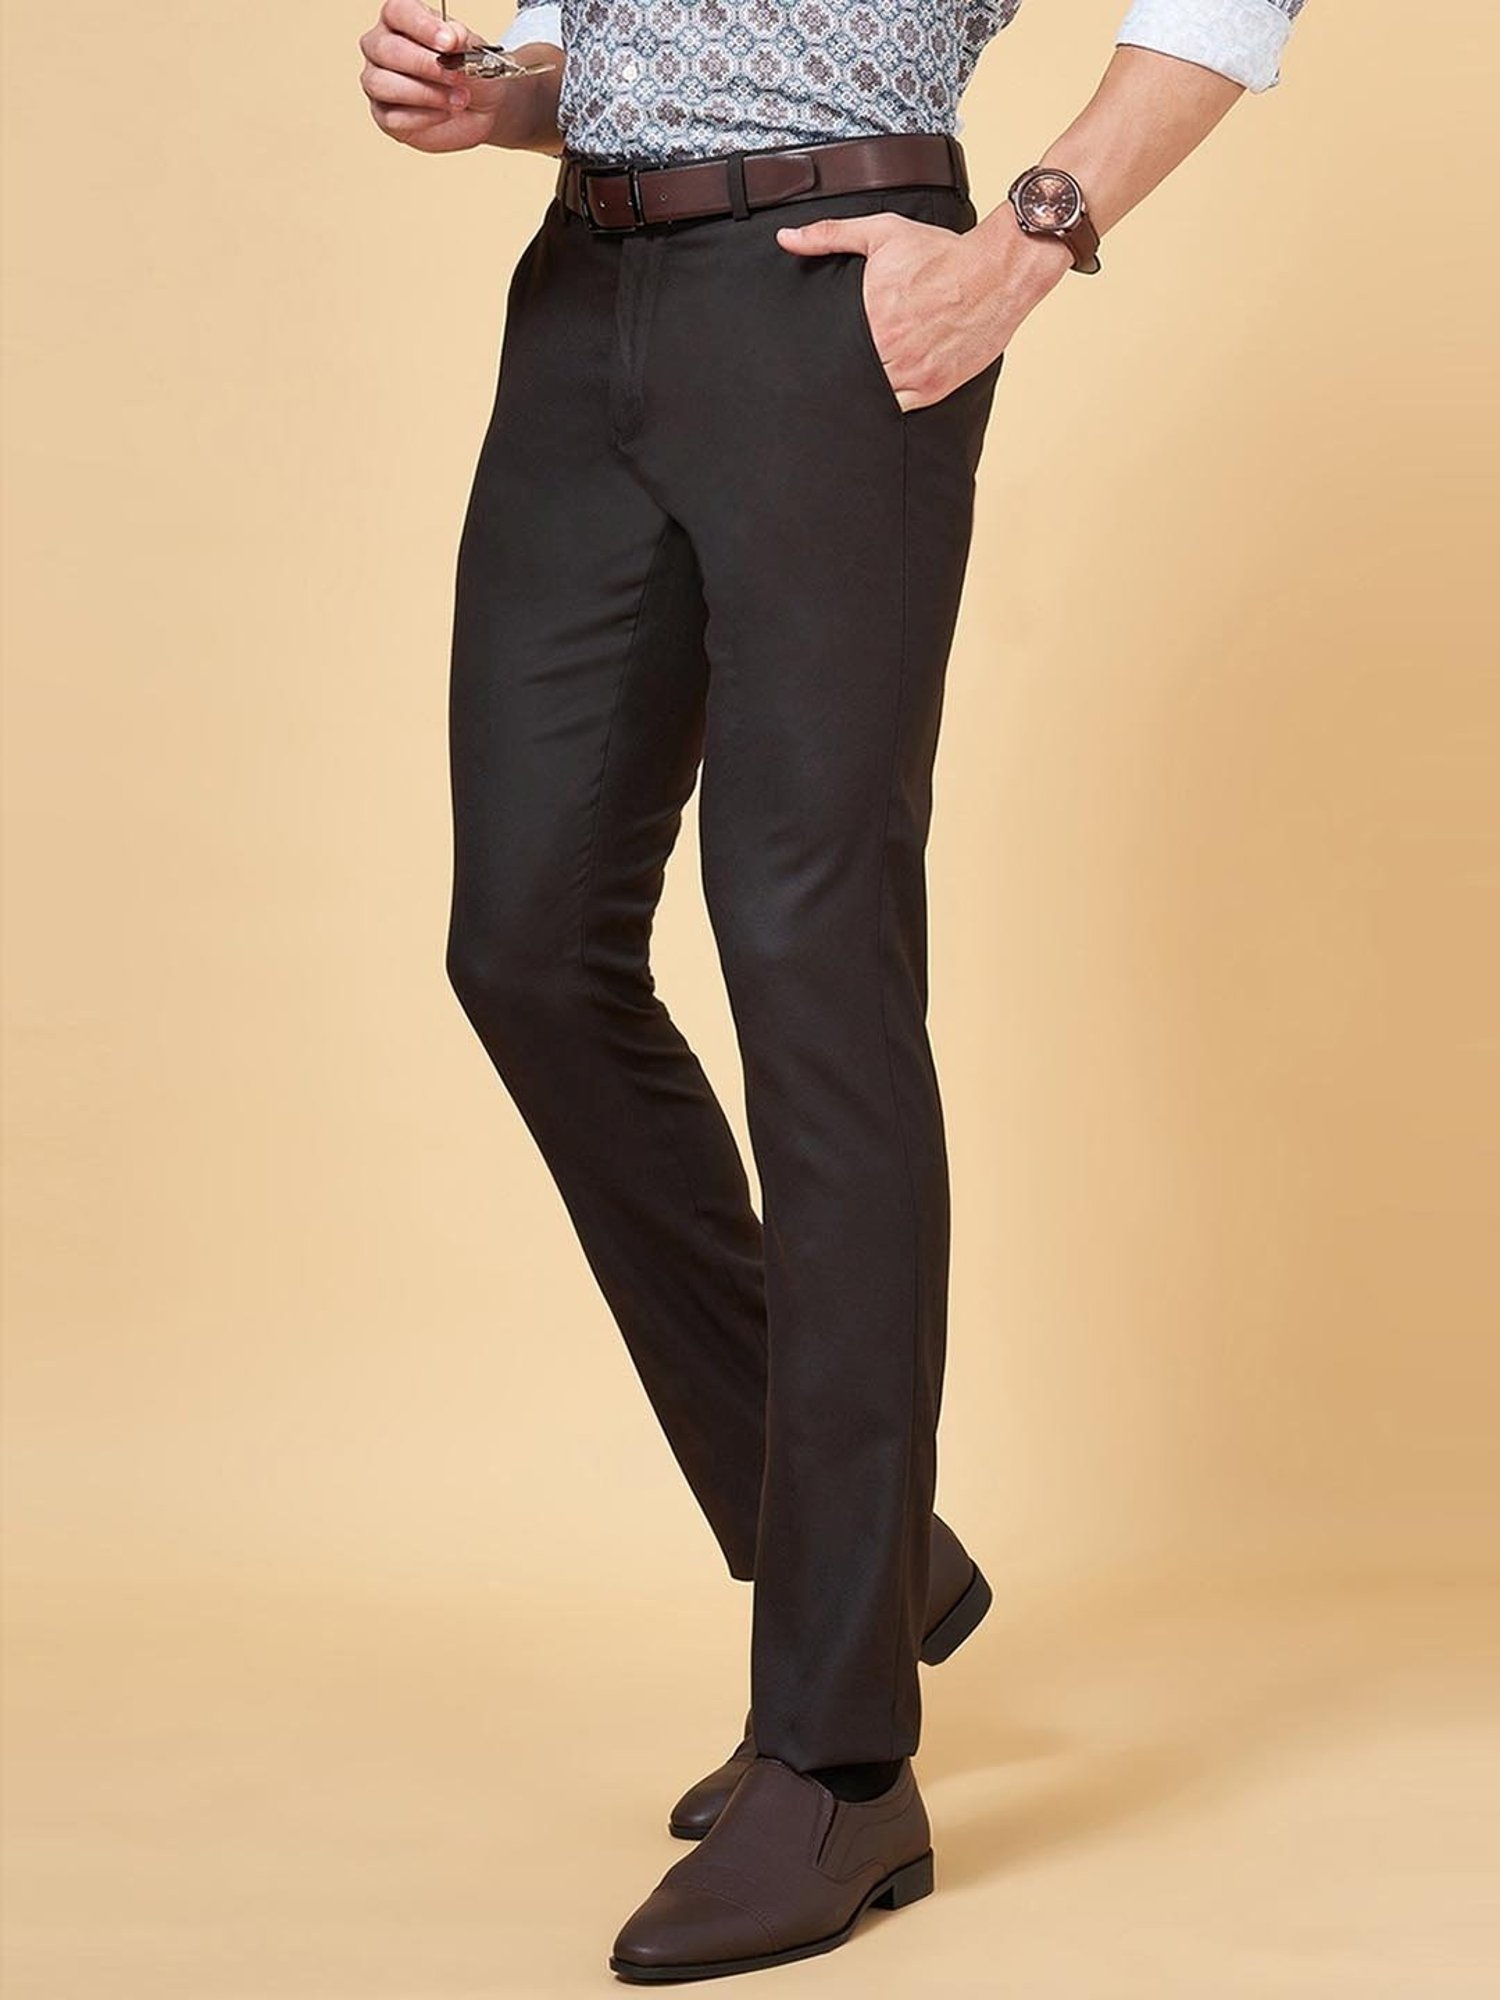 Peregrine by Pantaloons Grey & Blue Slim Fit Flat Front Trousers